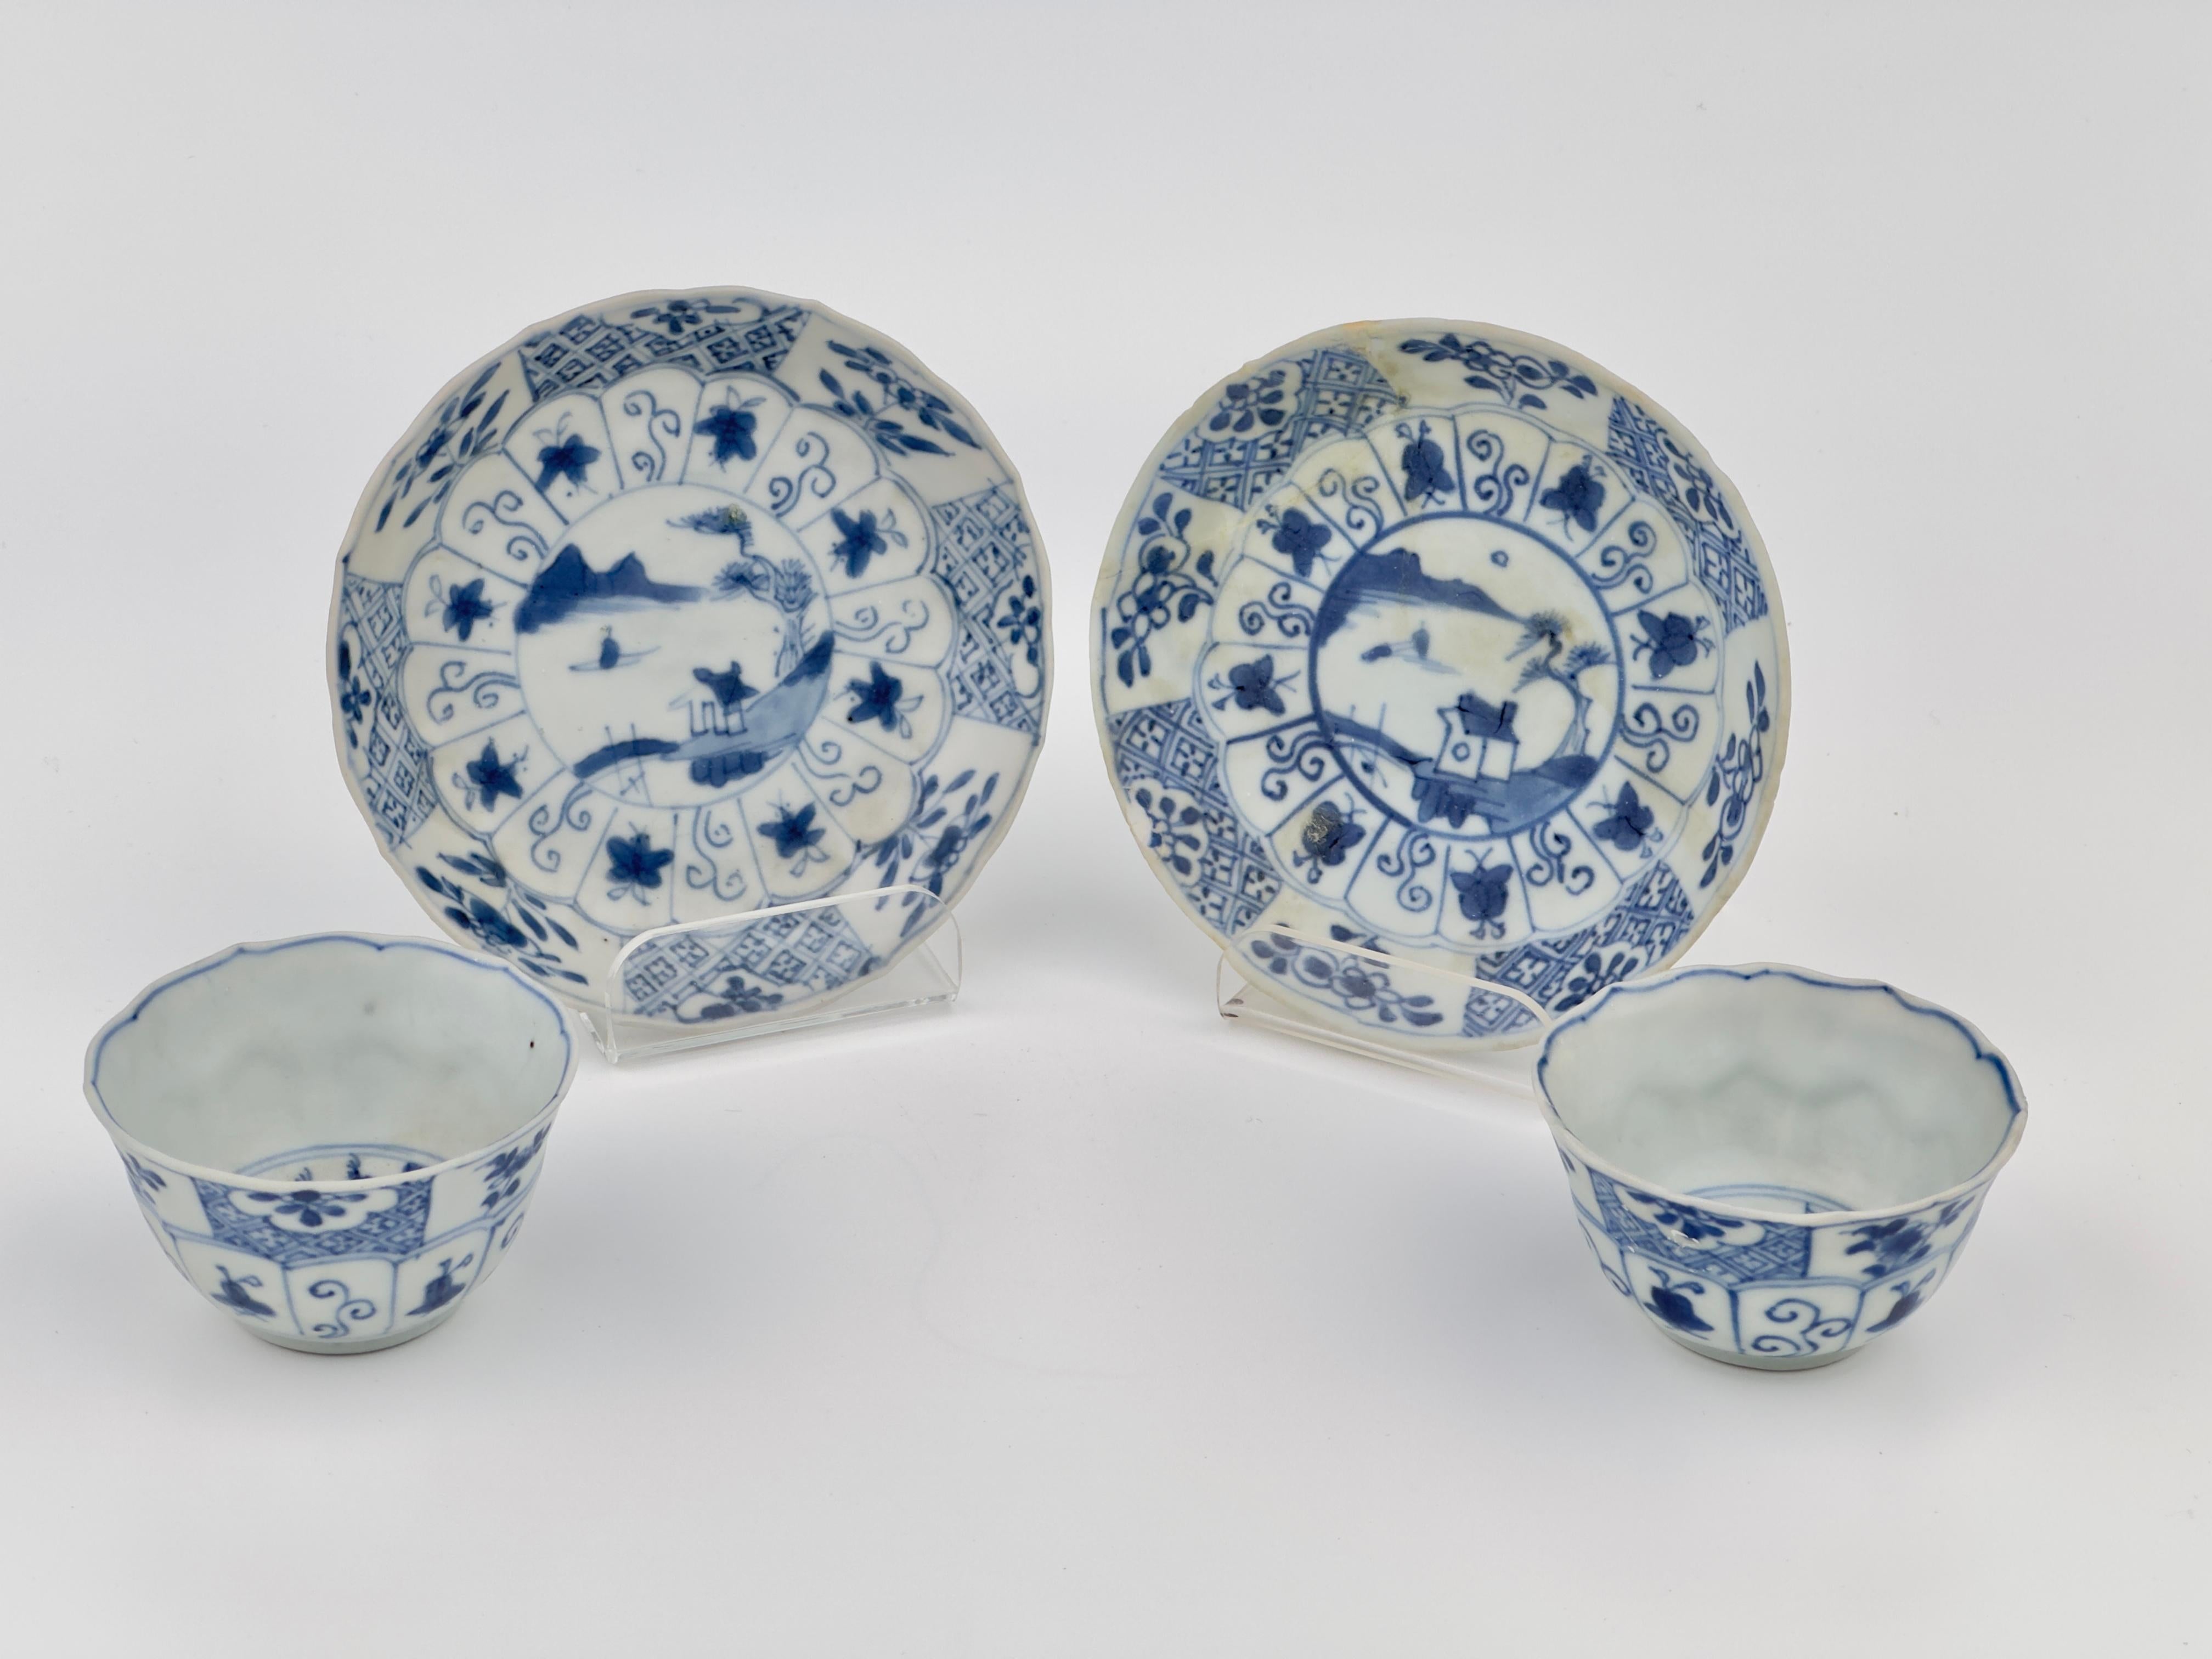 The teabowl and saucer set depicts botanical elements and butterflies, motifs rich in symbolism within Chinese culture. Butterflies often represent transformation and immortality, while the various flowers and plants indicate the changing seasons